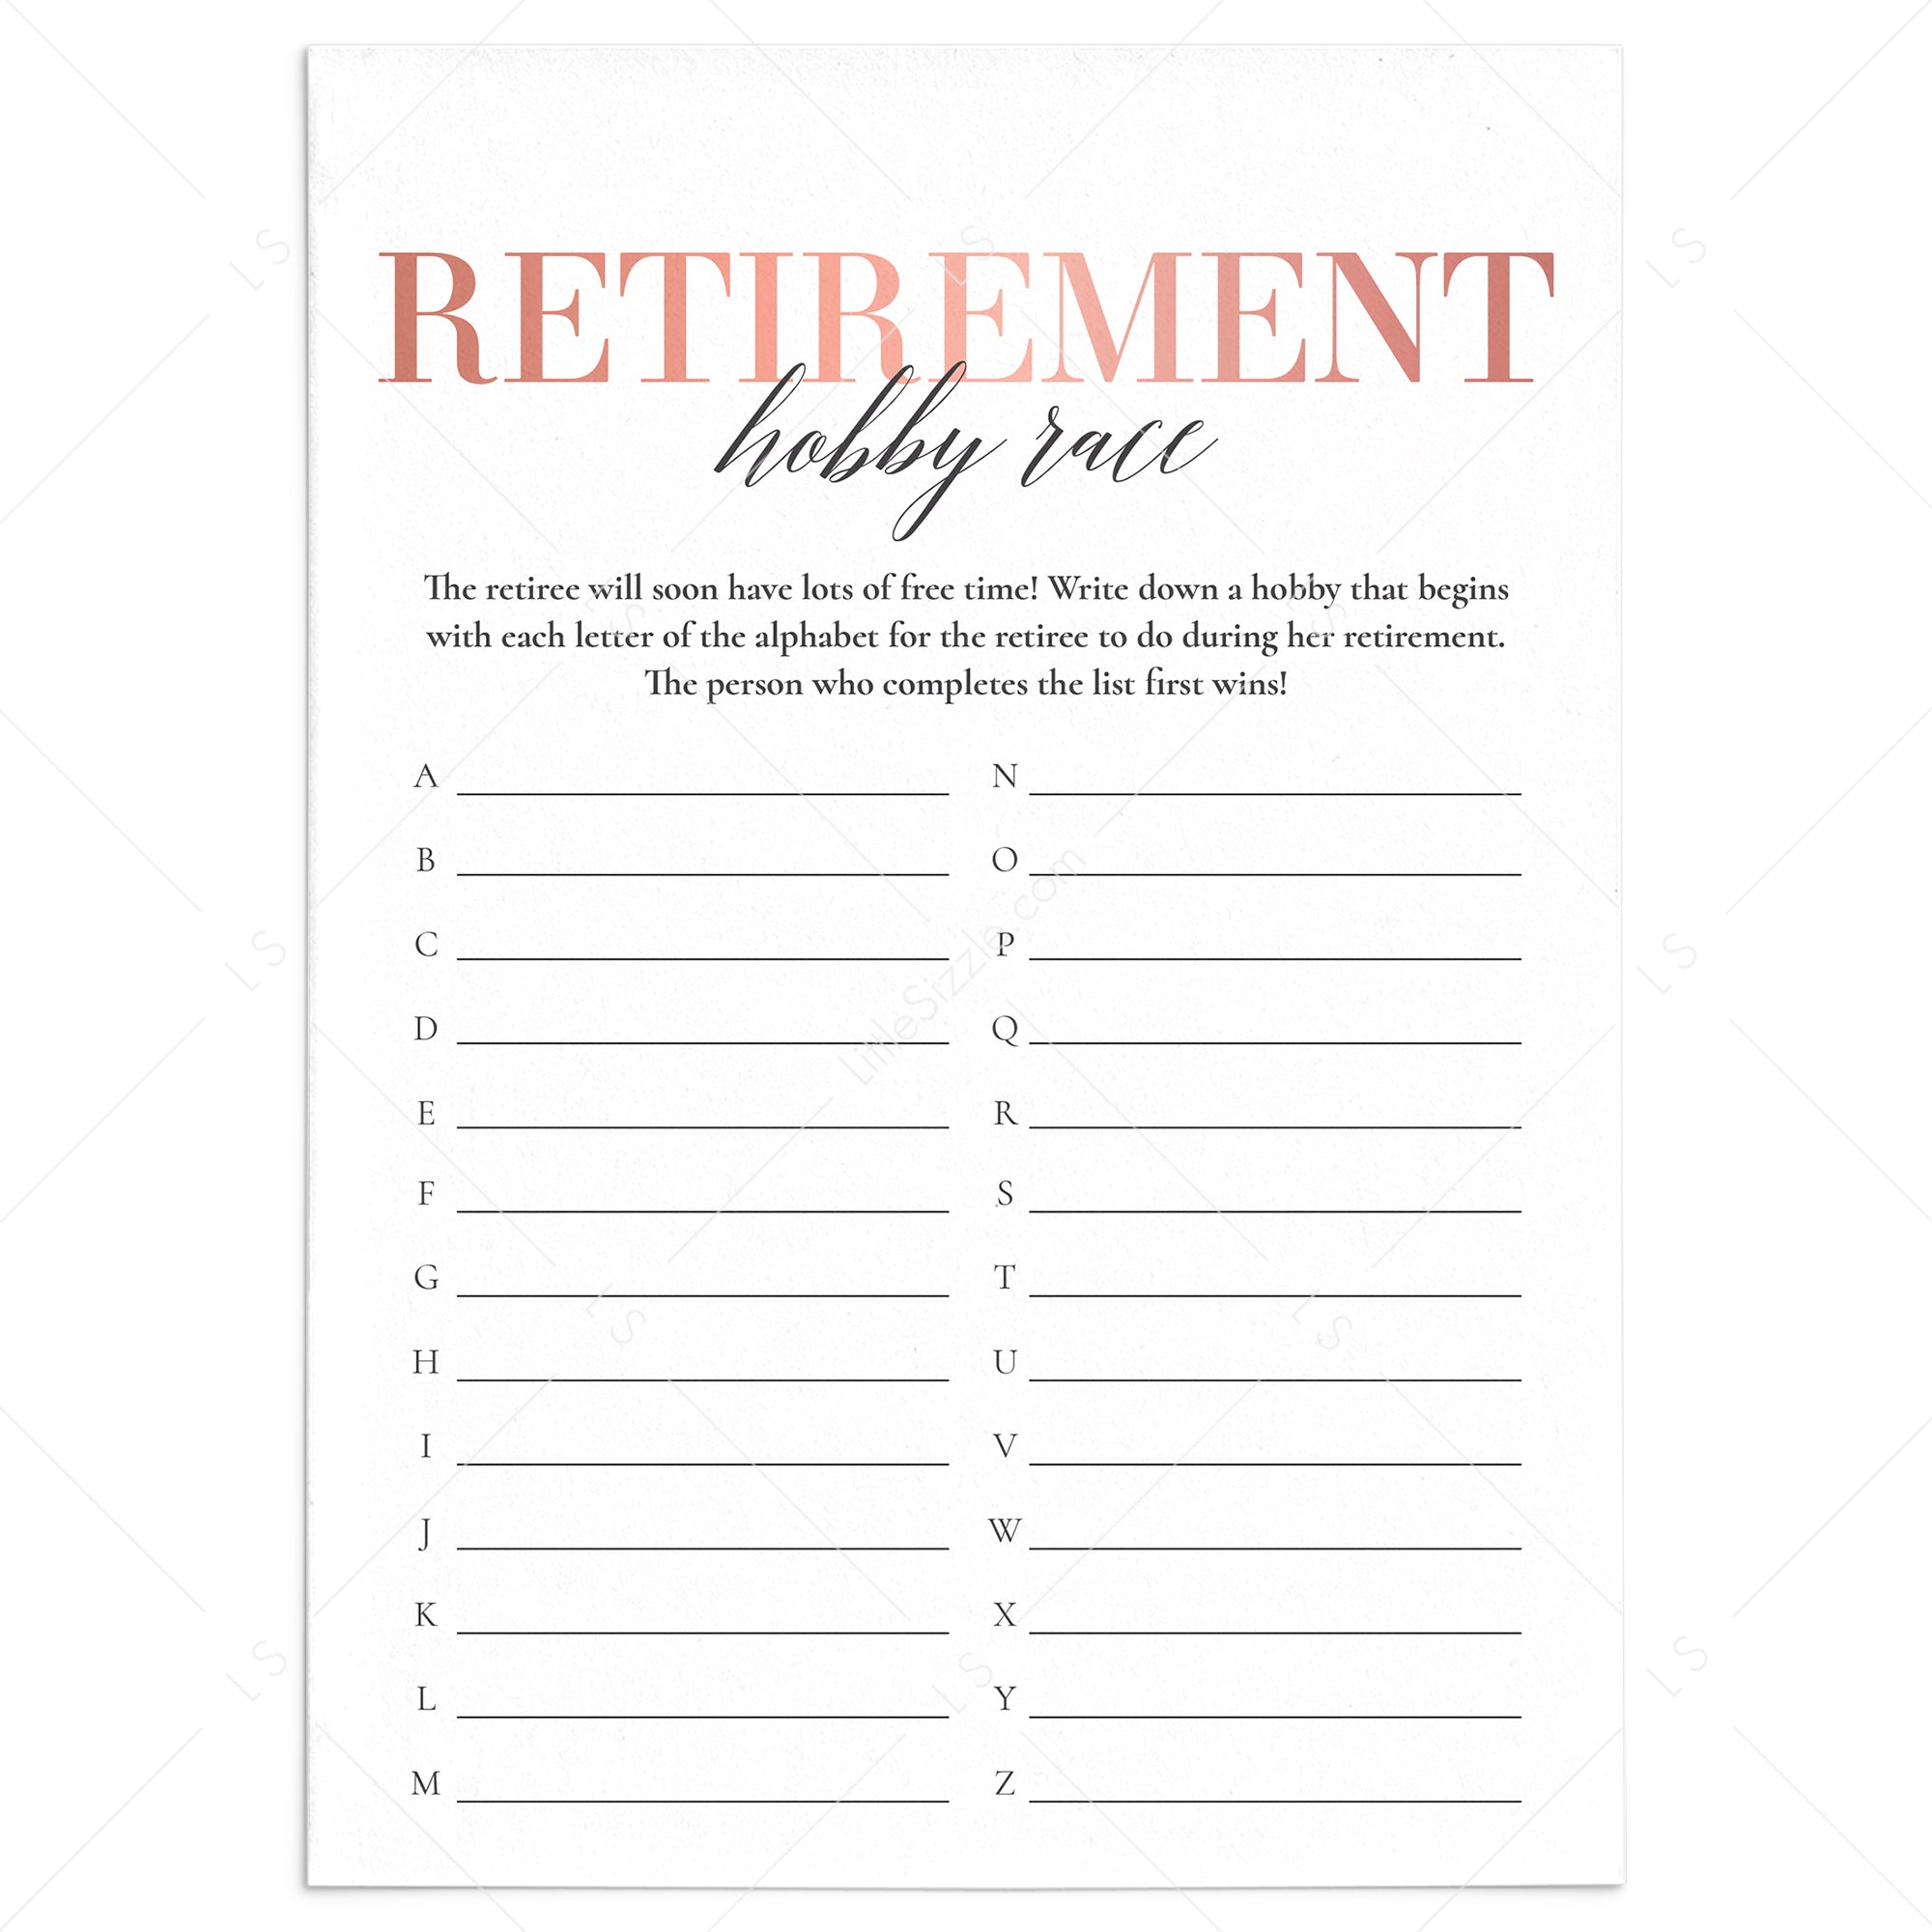 Retirement Hobby Race Game for Her Printable by LittleSizzle